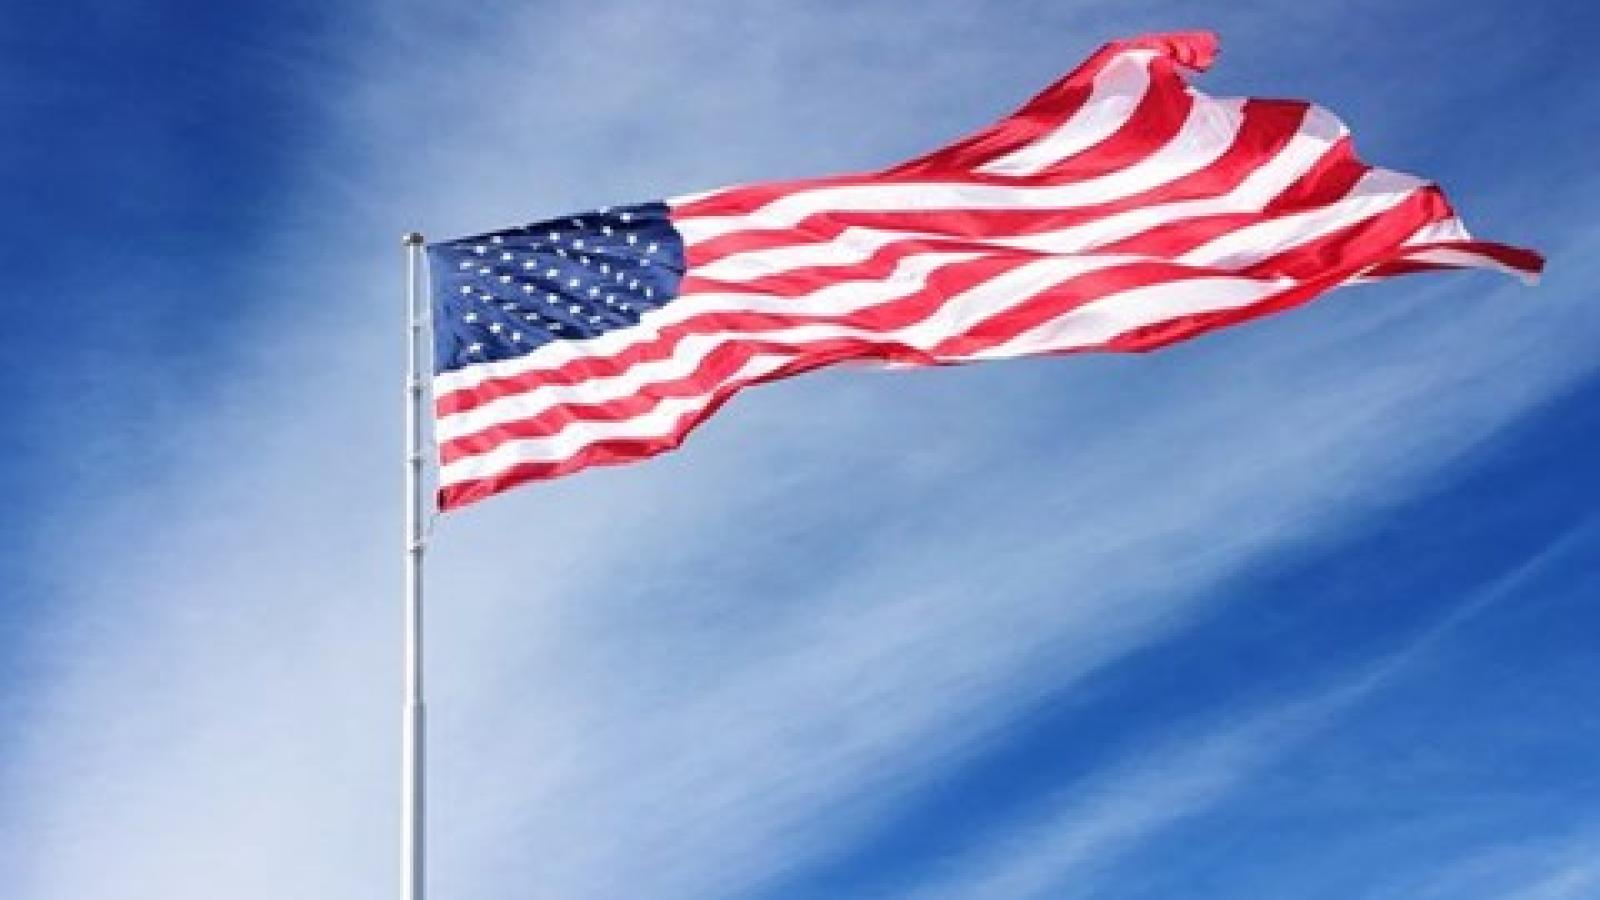 The flag of the United States waving in the wind.